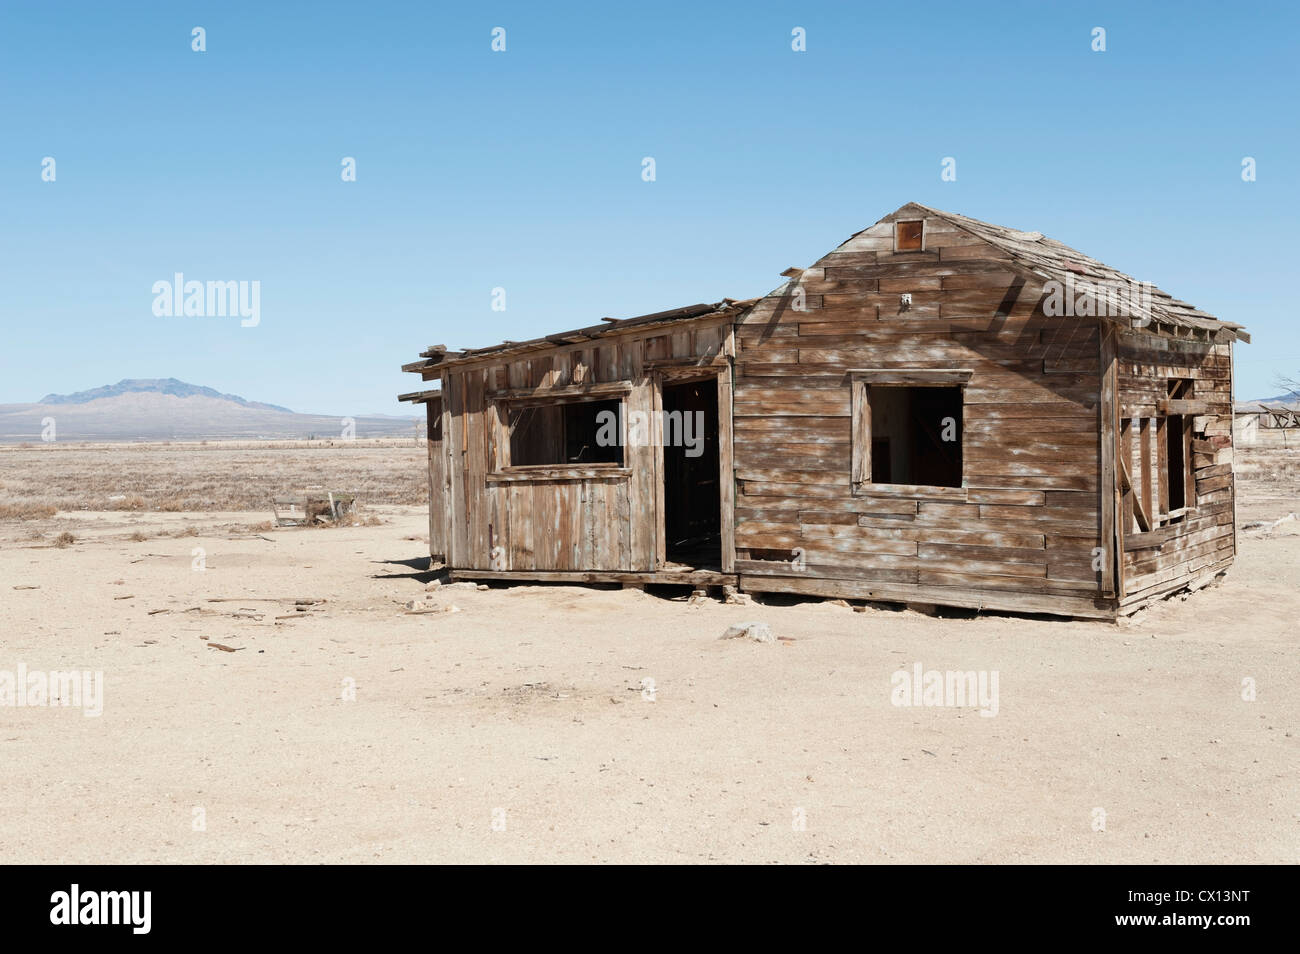 Timber home on arid landscape Stock Photo